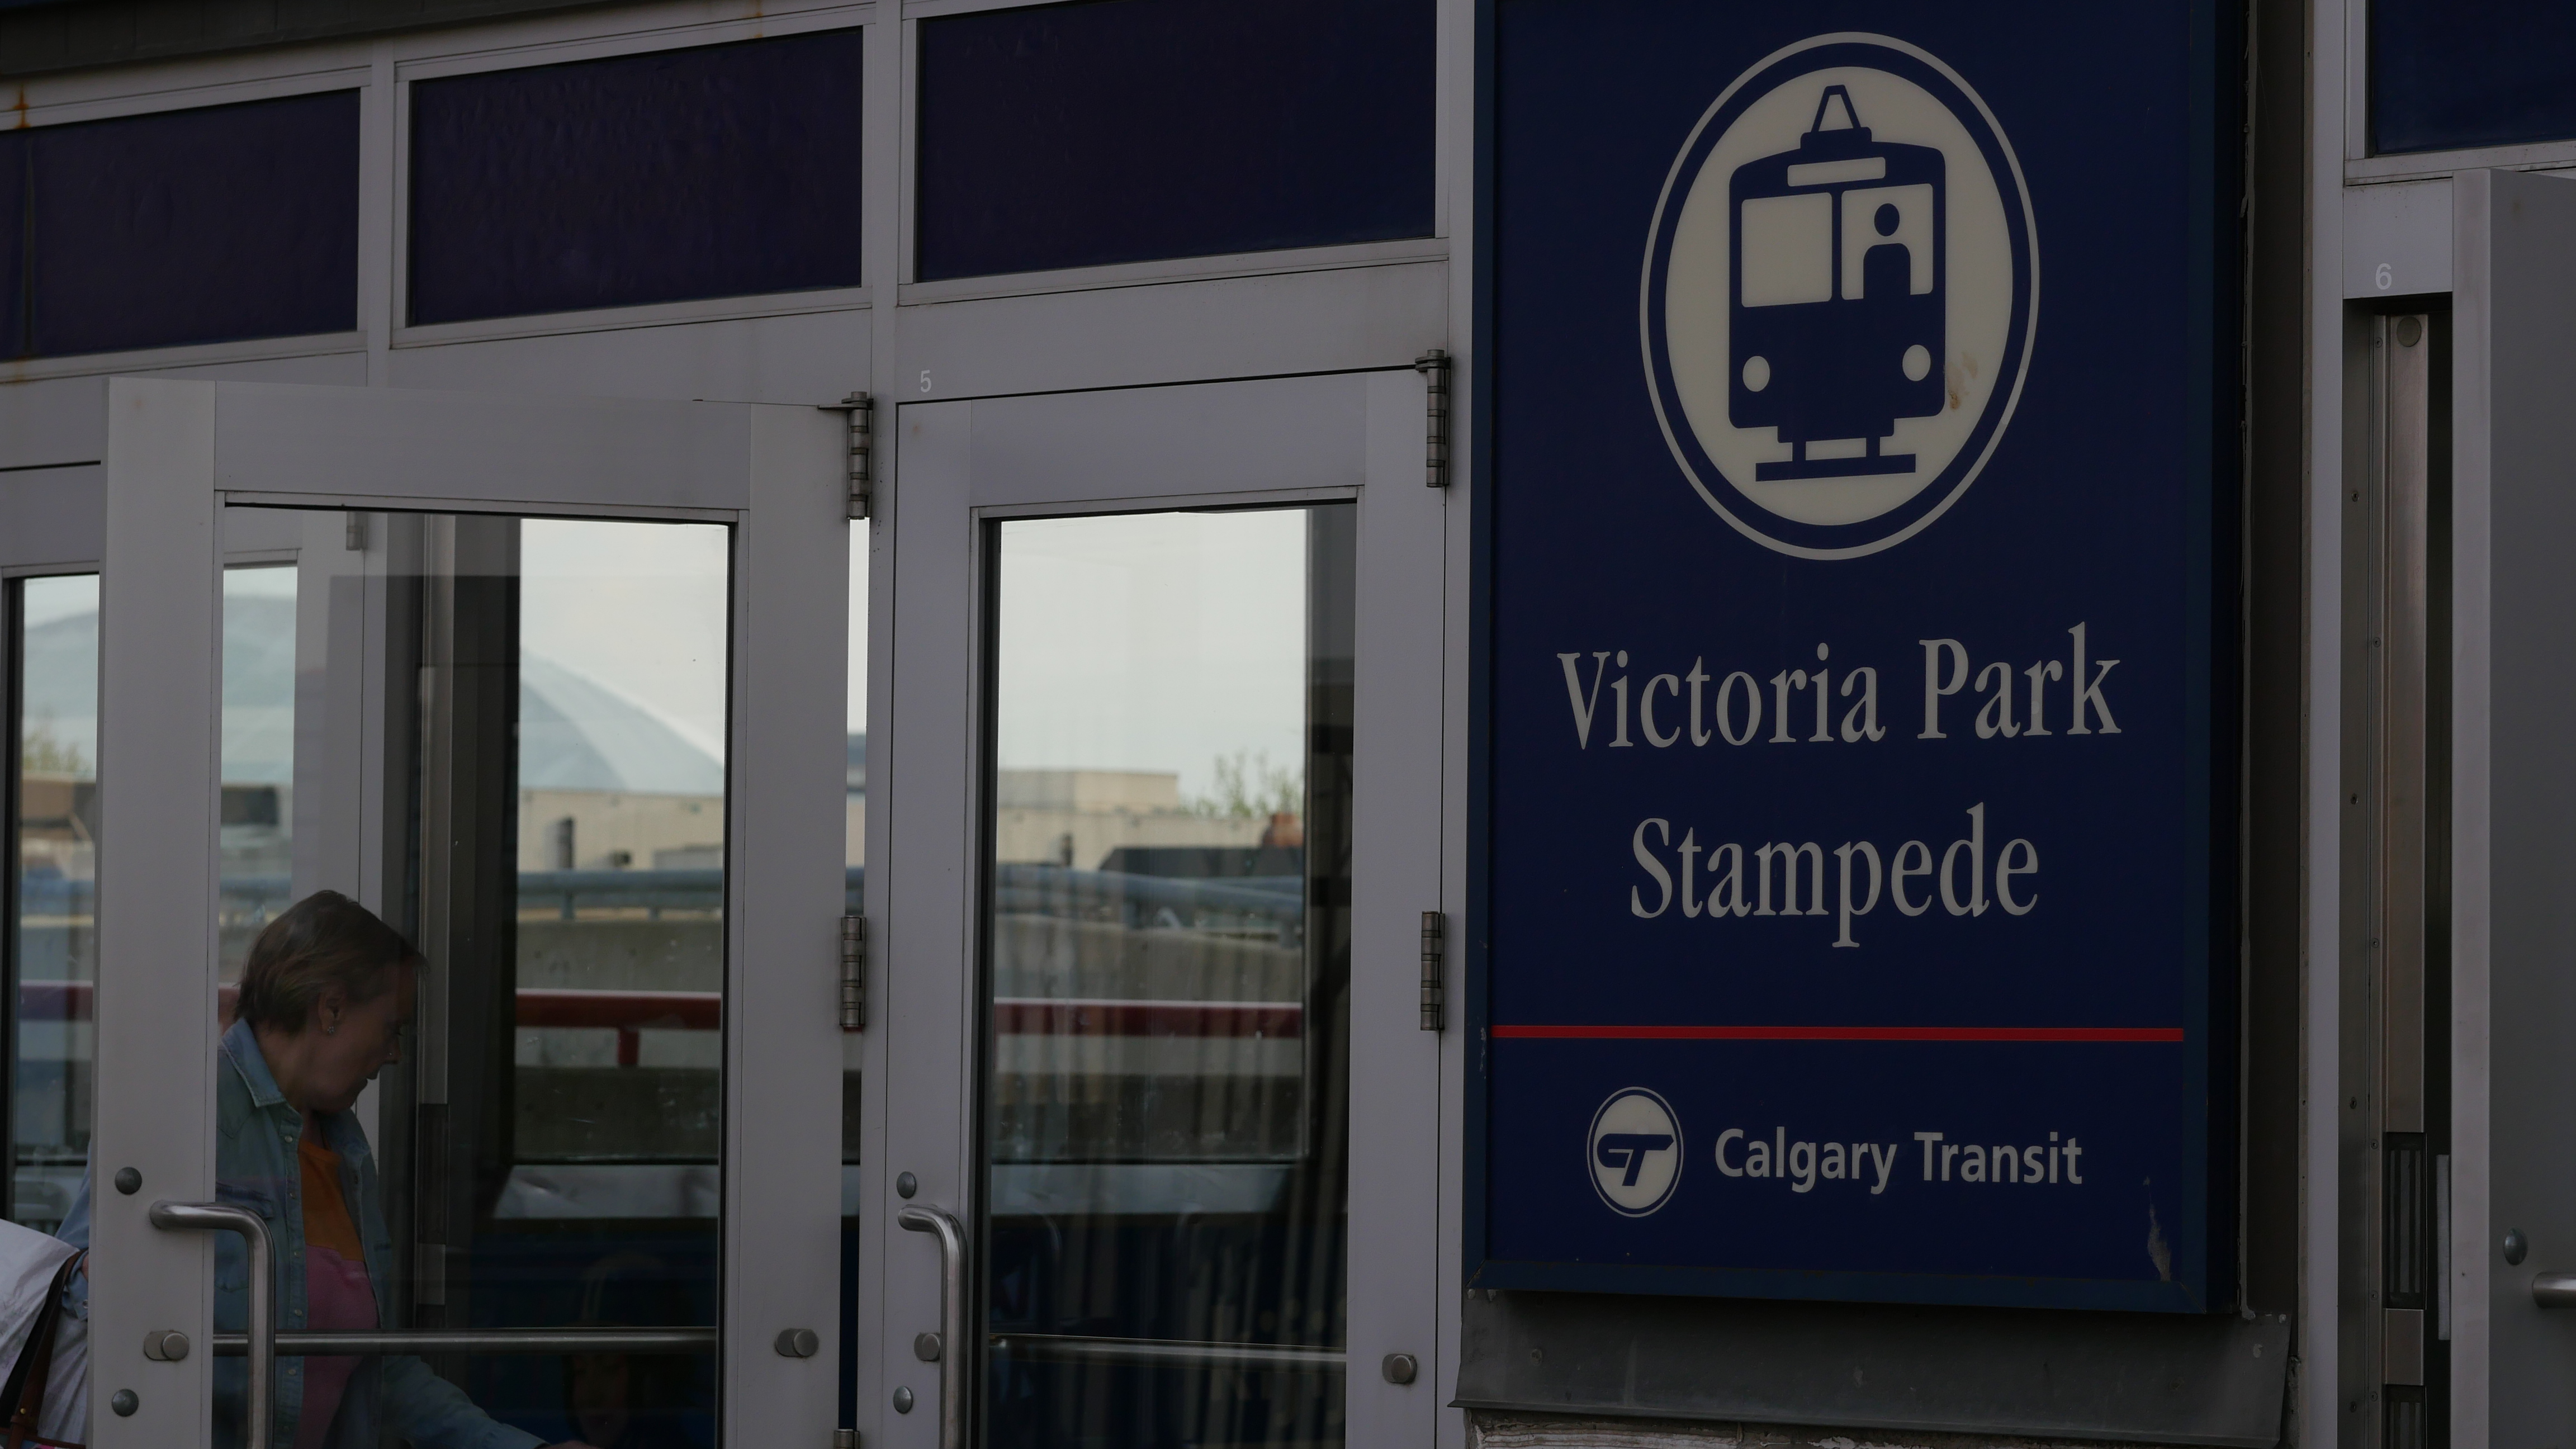 Senior injured by 'mob' trying to get on crowded CTrain after Stampede fireworks